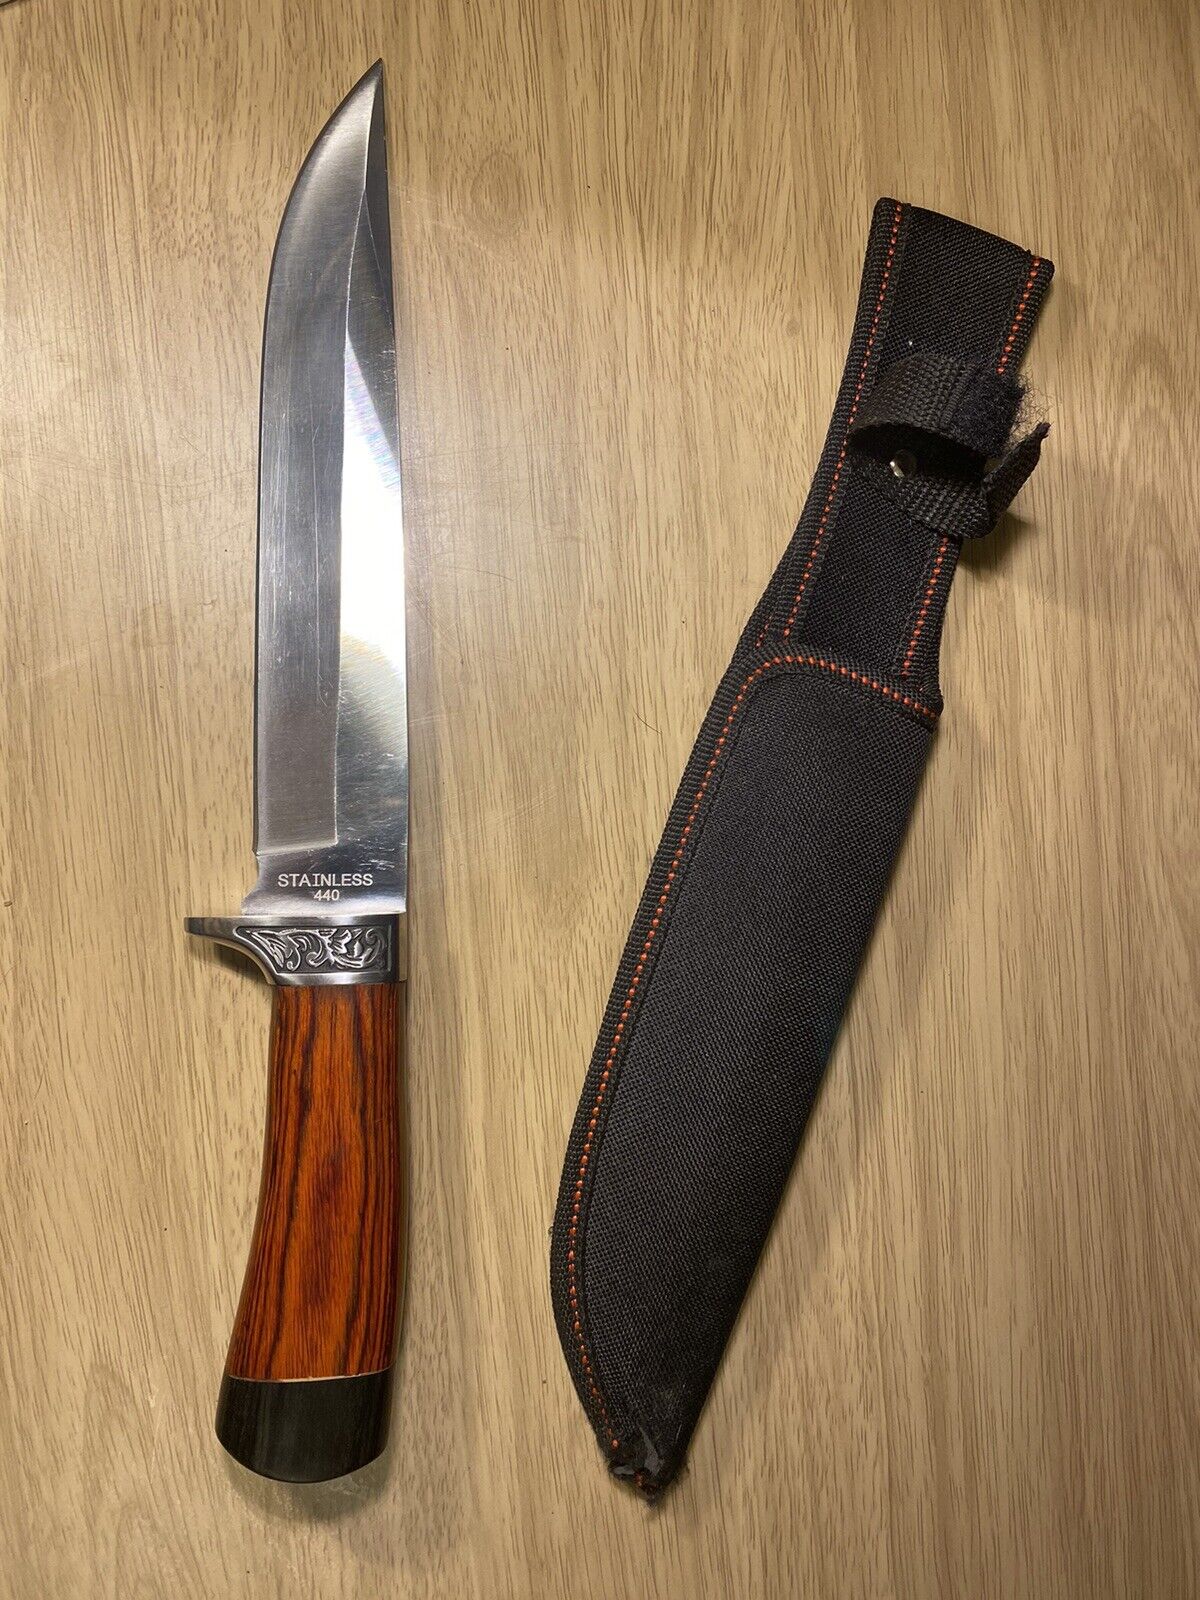 13” Bowie Knife with Wooden Handle And Sheath. Knife Weight Is 10 1/2 Ounces 